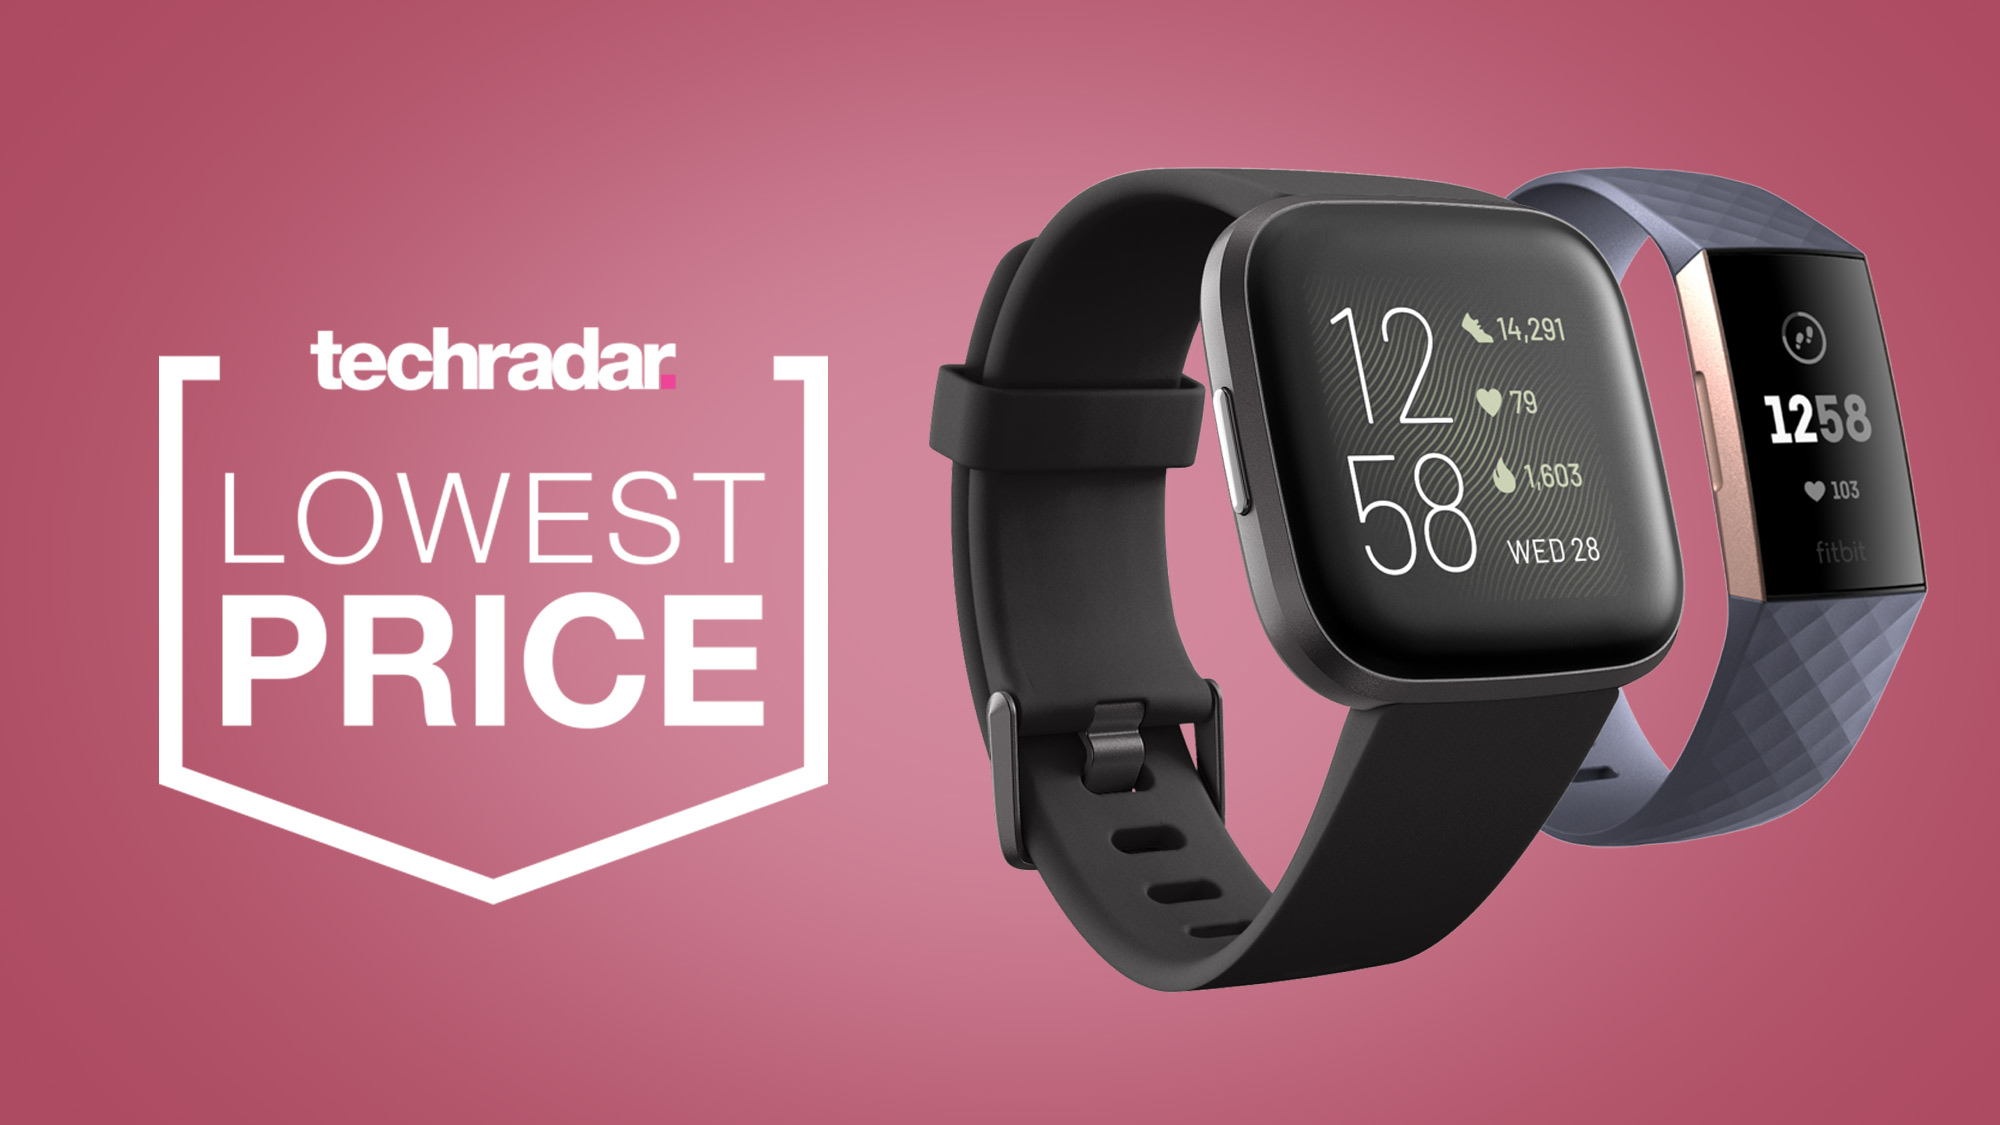 fitbit charge 3 techradar